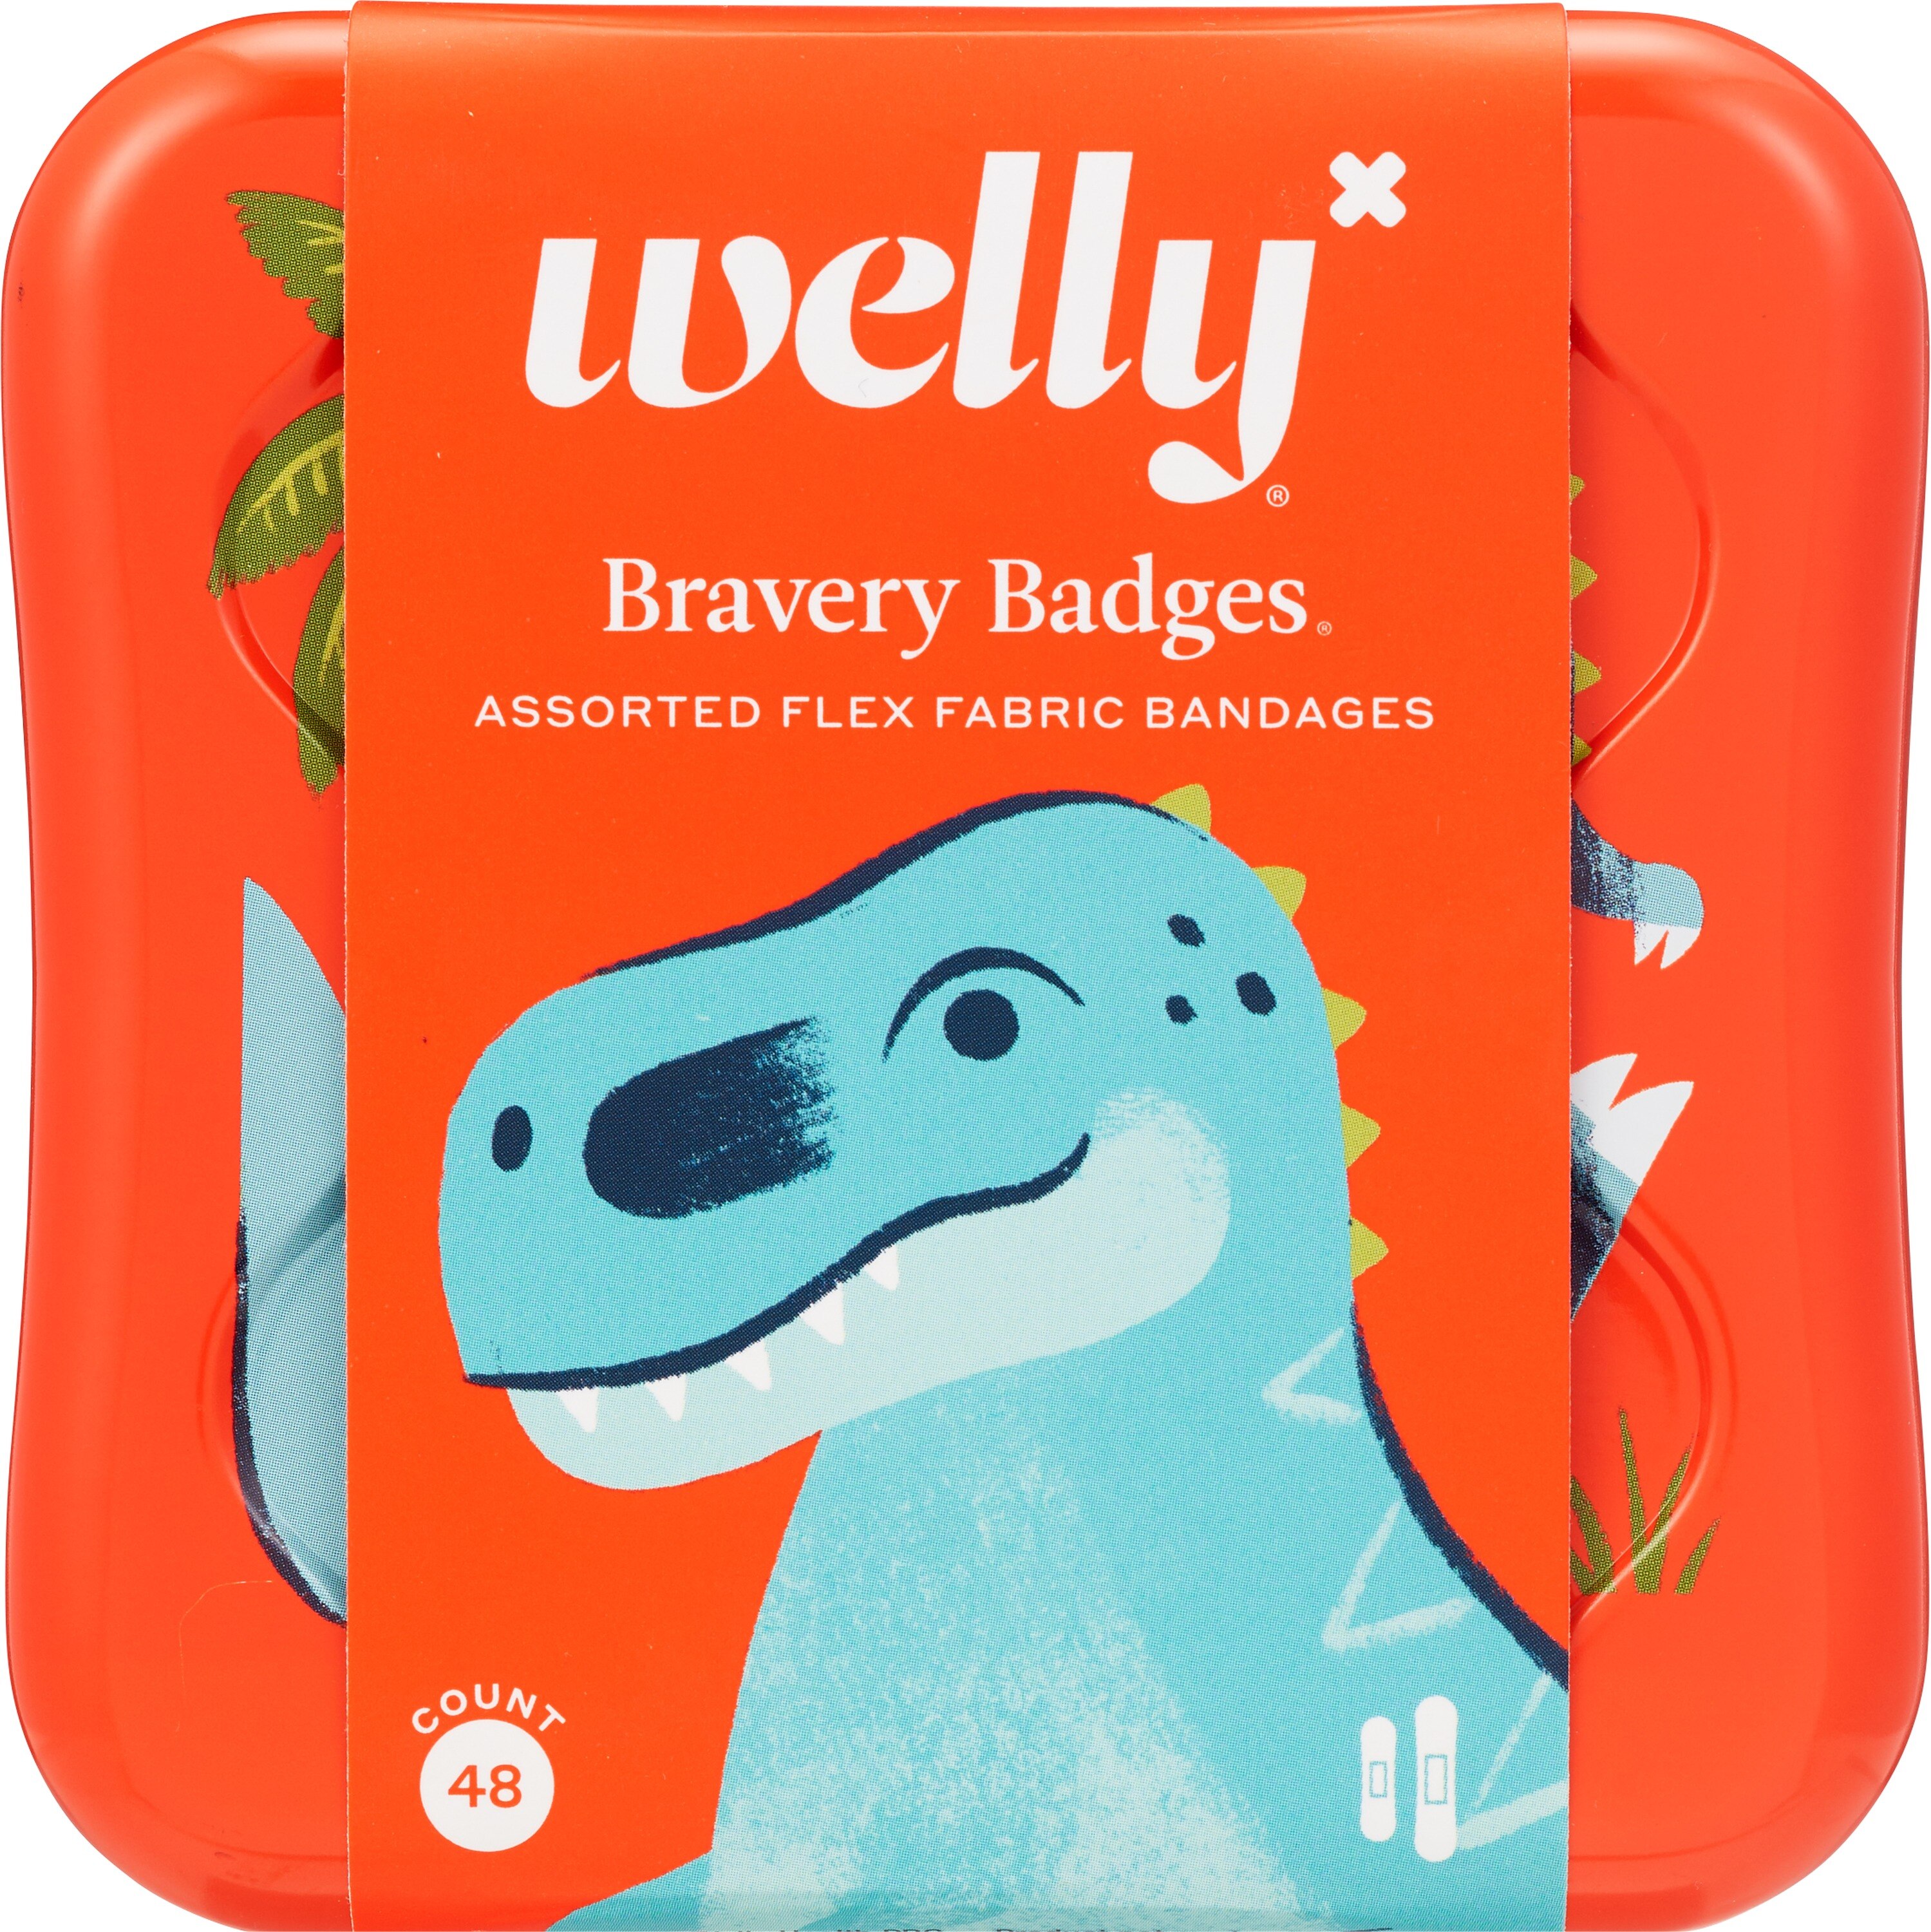 Welly Kids Bravery Badges Assorted Rainbow Flex Fabric Bandages - 48 CT